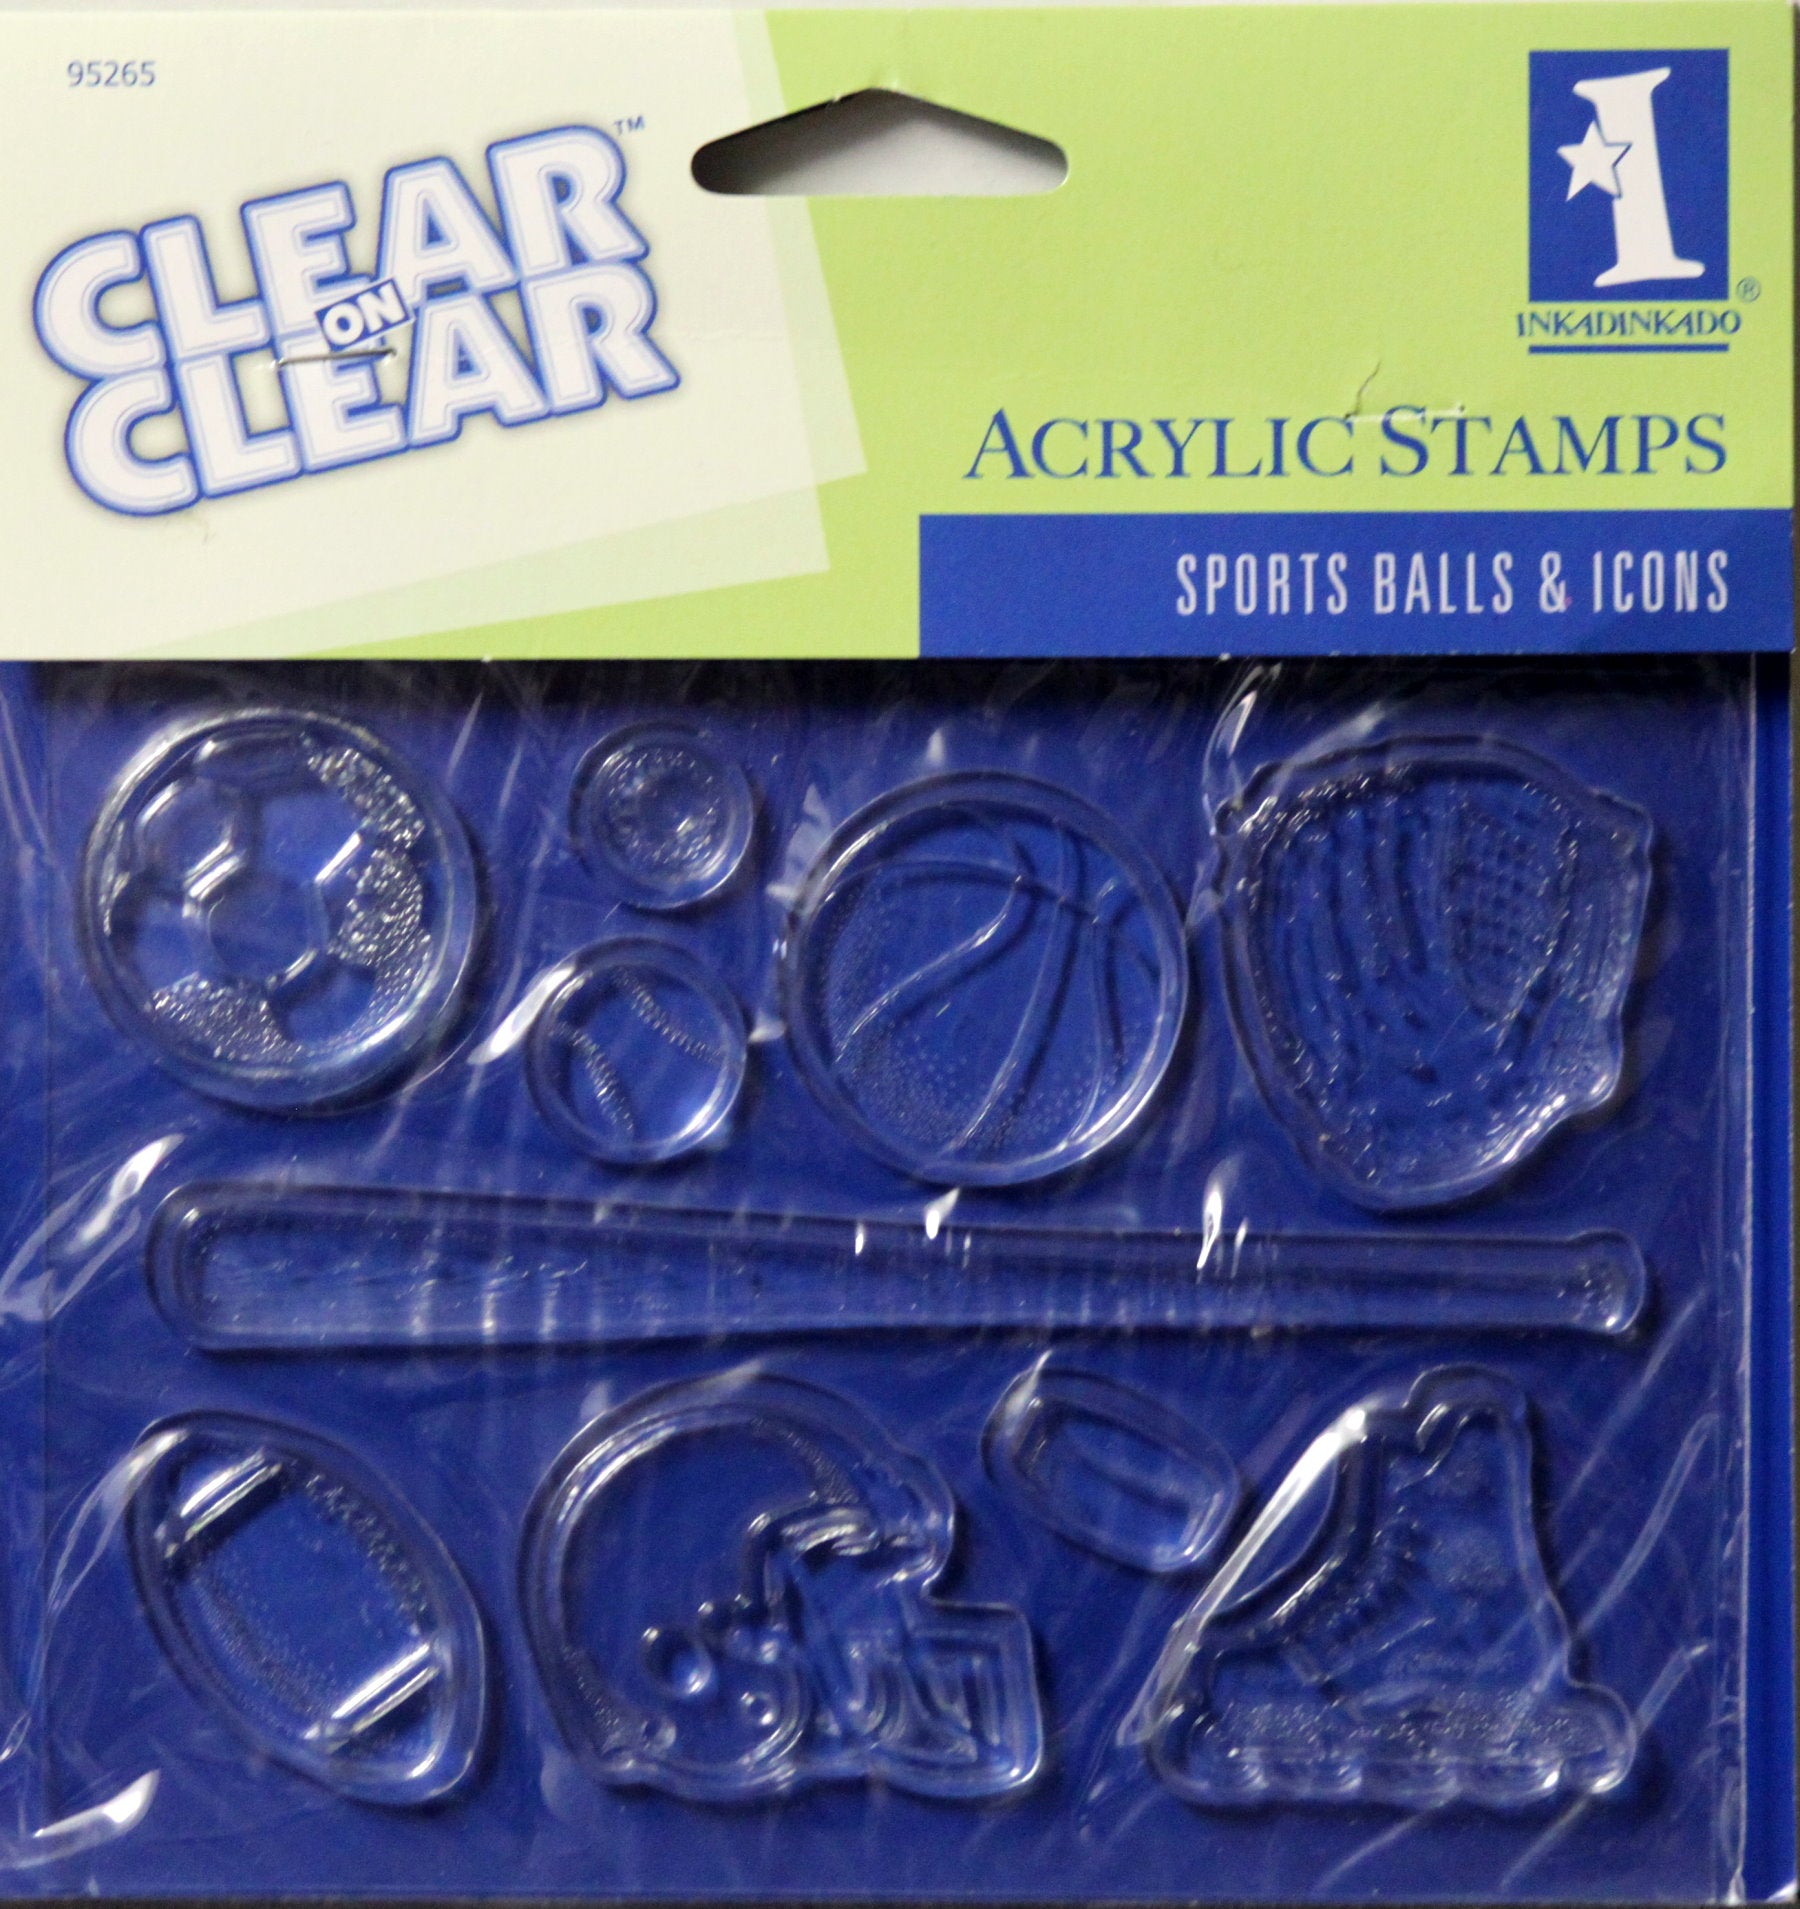 Inkadinkado Clear On Clear Sports Balls & Icons Acrylic Stamps